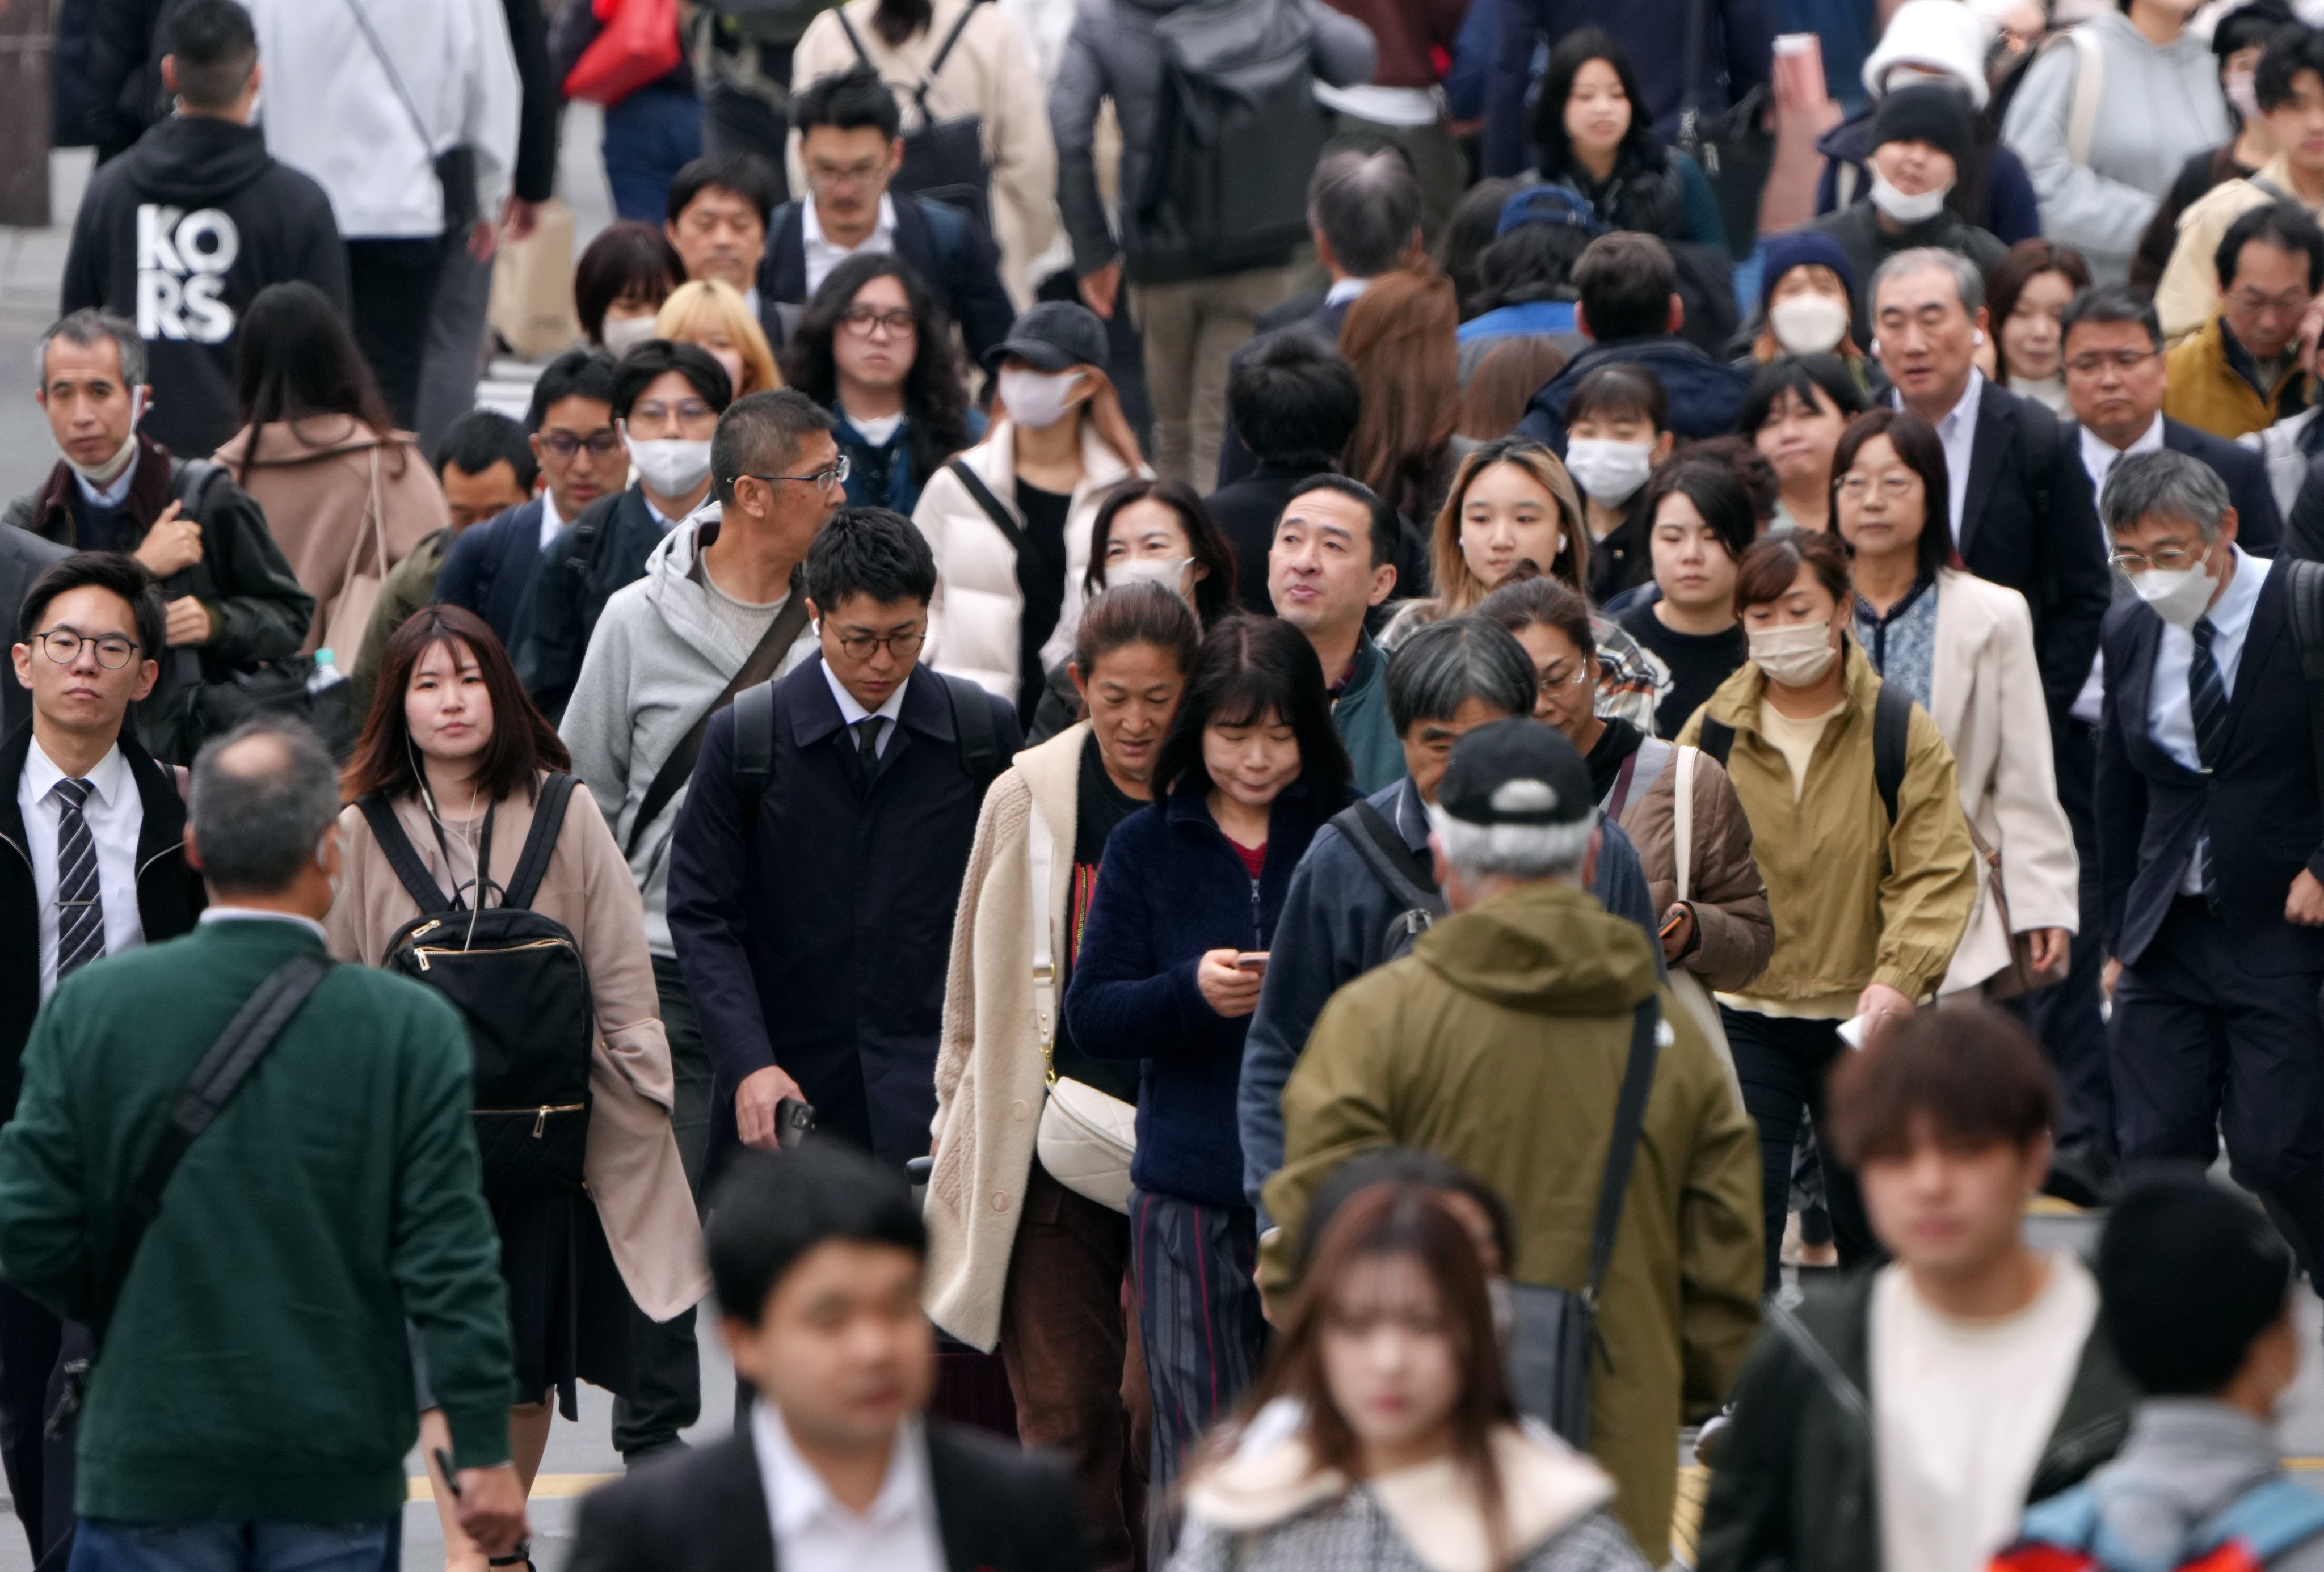 Pedestrians commute on Shinjuku street in Tokyo. Japan would need 6.7 million foreign workers by 2040 to meet its own projected economic growth rates, a 2022 report showed. Photo: EPA-EFE